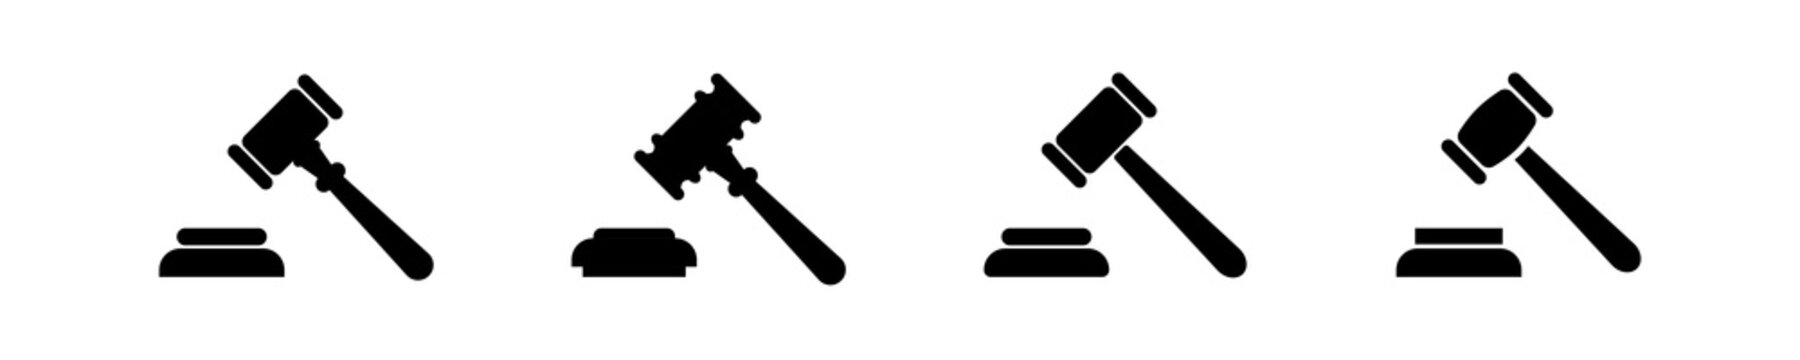 Gavel set icons. Judge gavels collection flat icon. Auction hammer icon. Black gavel - stock vector.